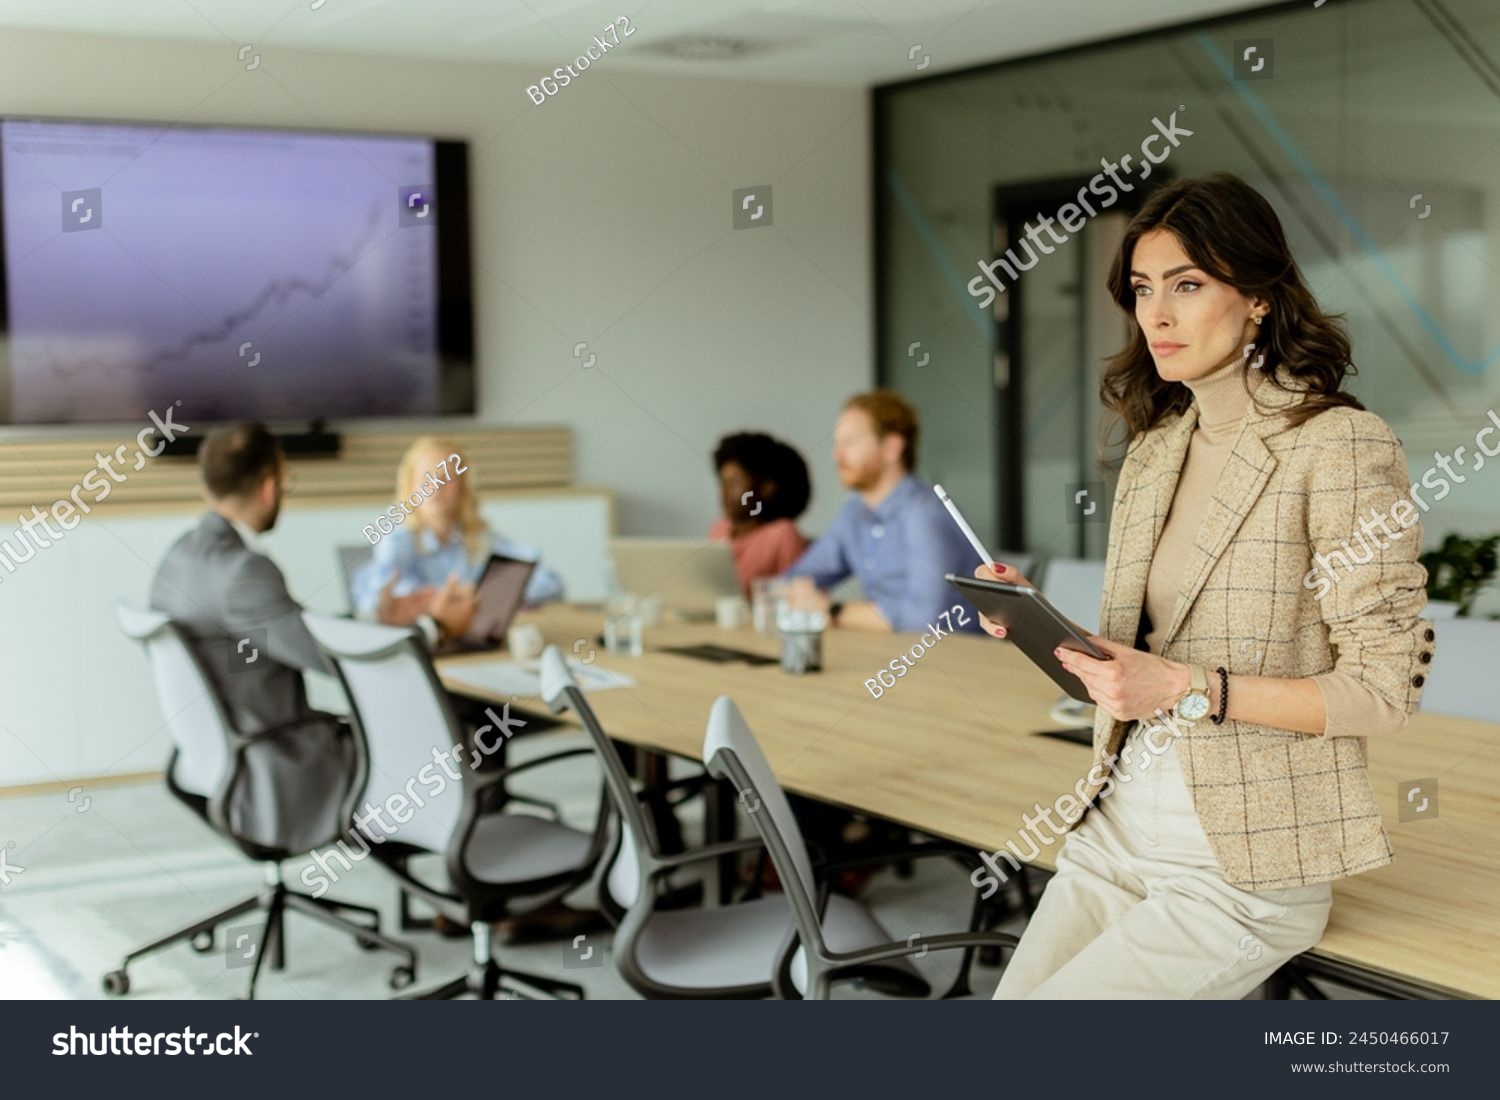 A poised woman with a tablet stands at the forefront of a collaborative office space, her team engaged in discussion behind her. #2450466017